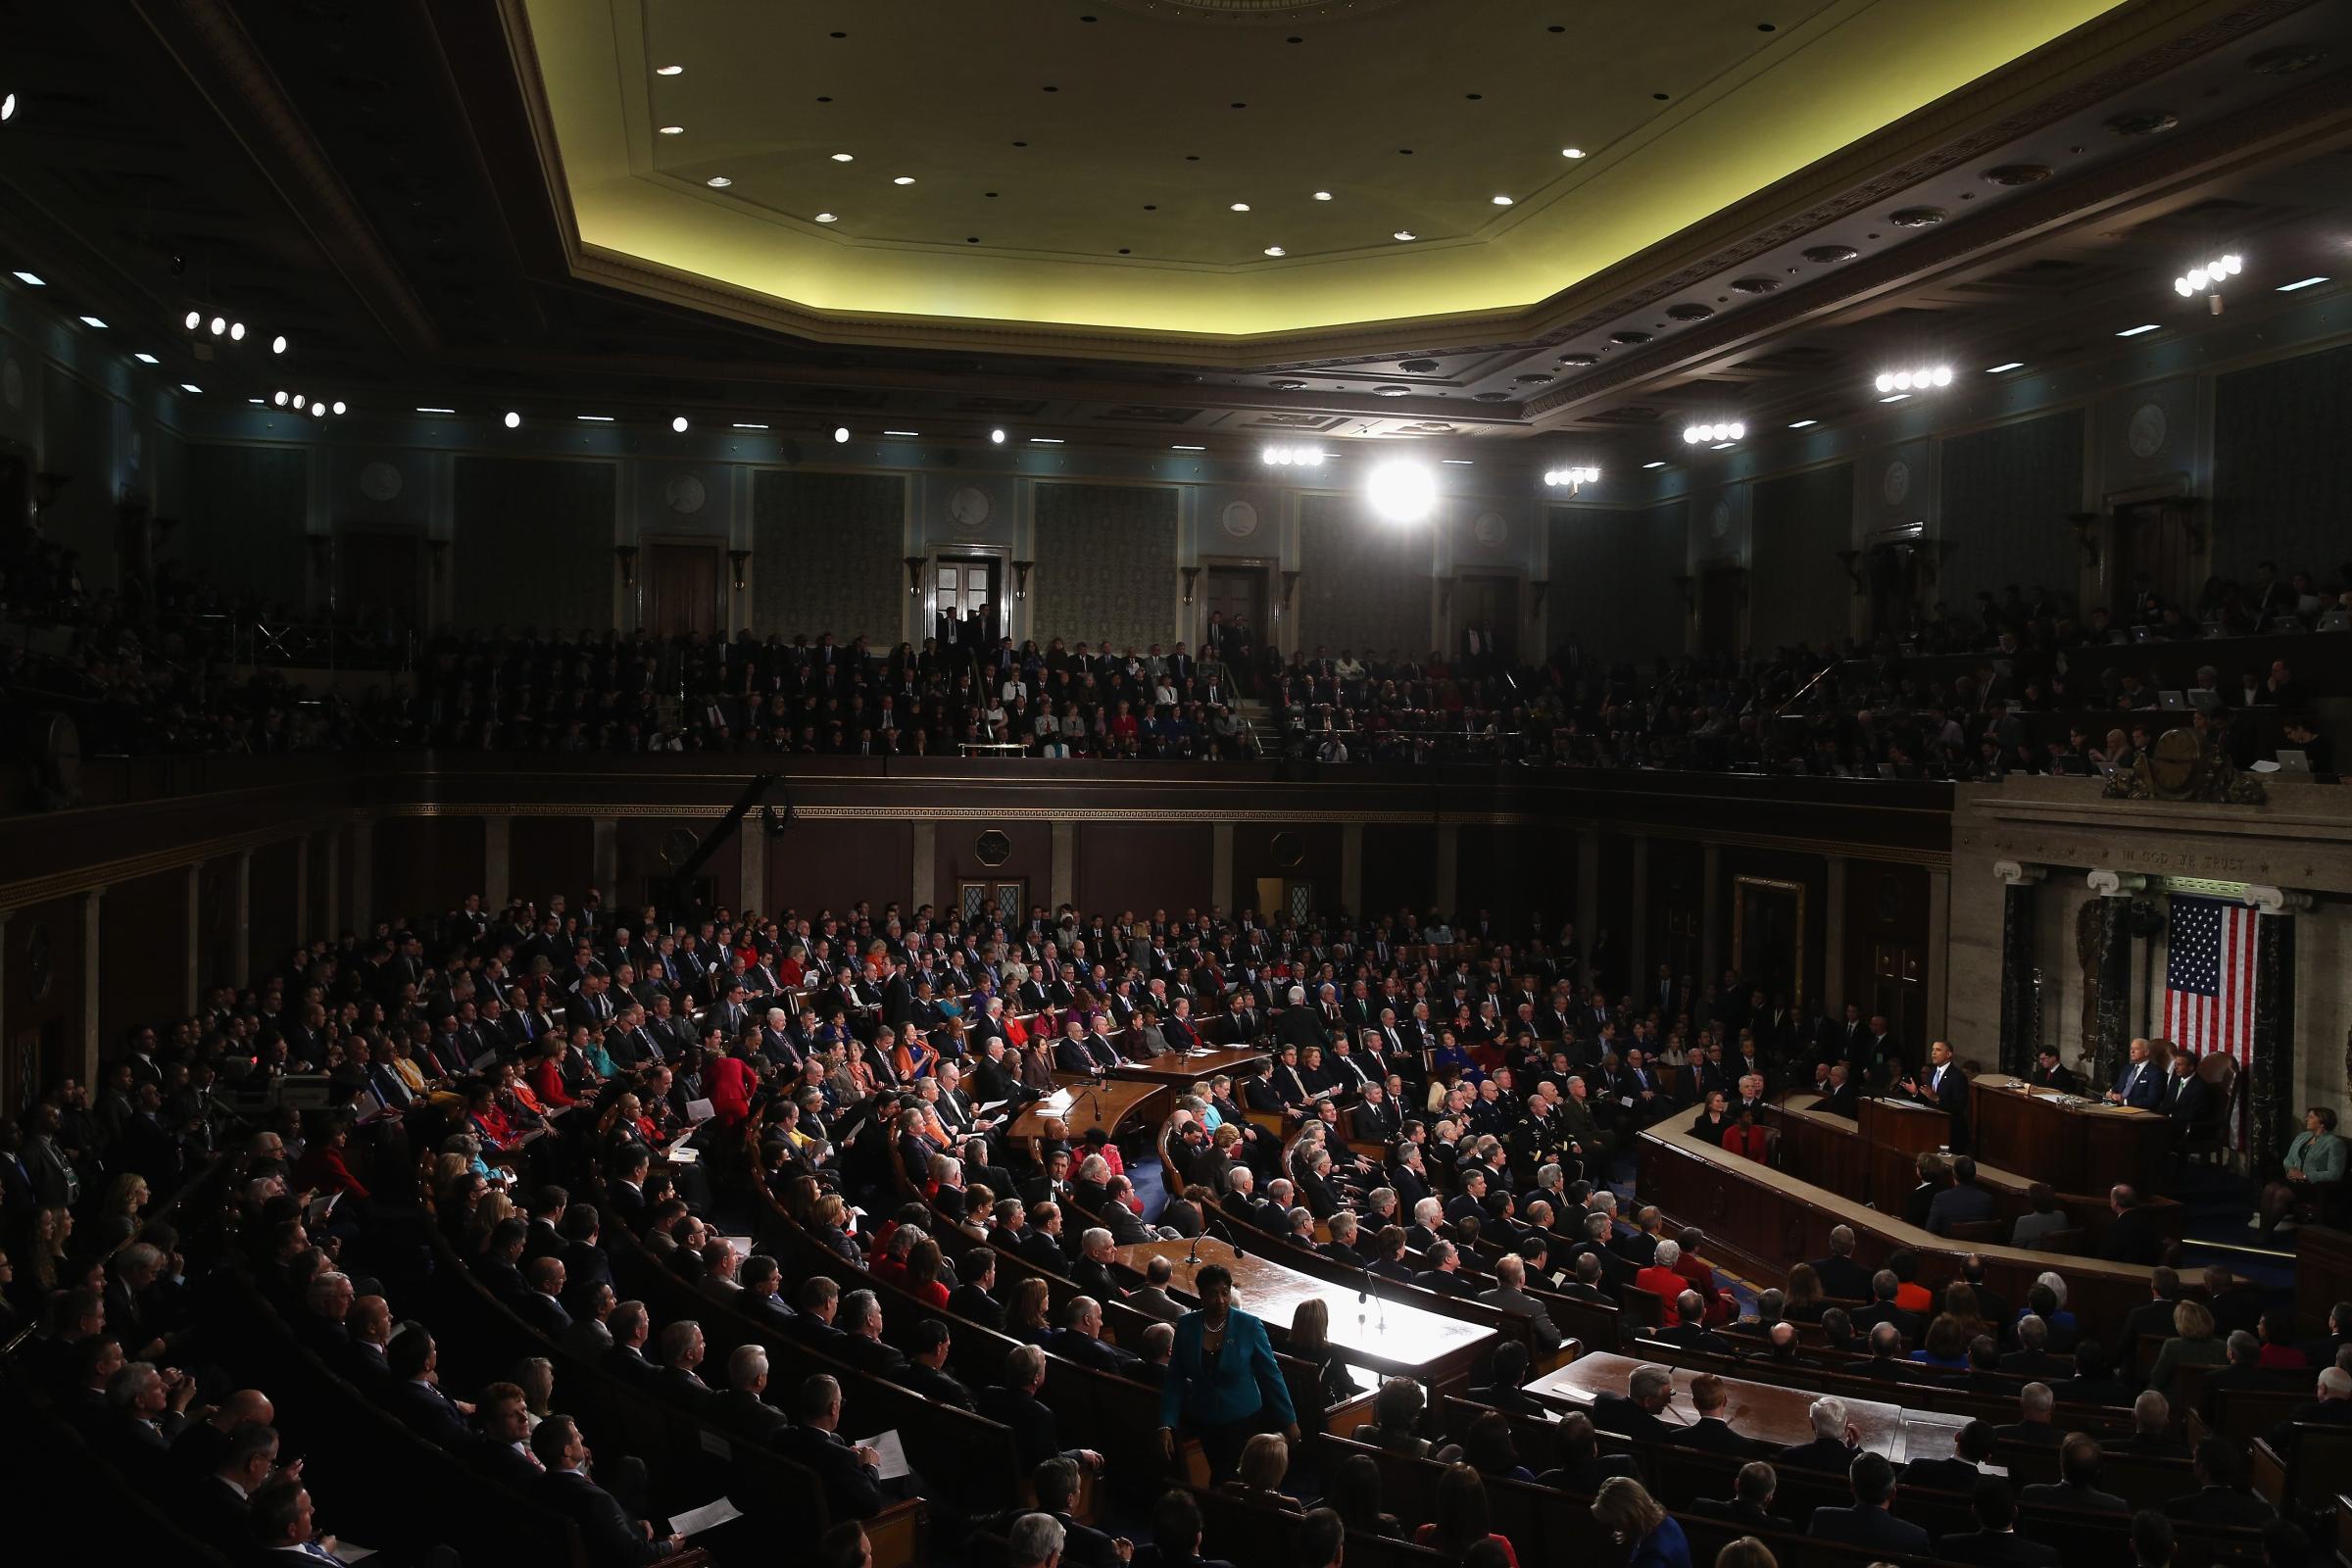 President Barack Obama delivers the State of the Union address to a joint session of Congress in the House Chamber at the U.S. Capitol on January 28, 2014 in Washington.